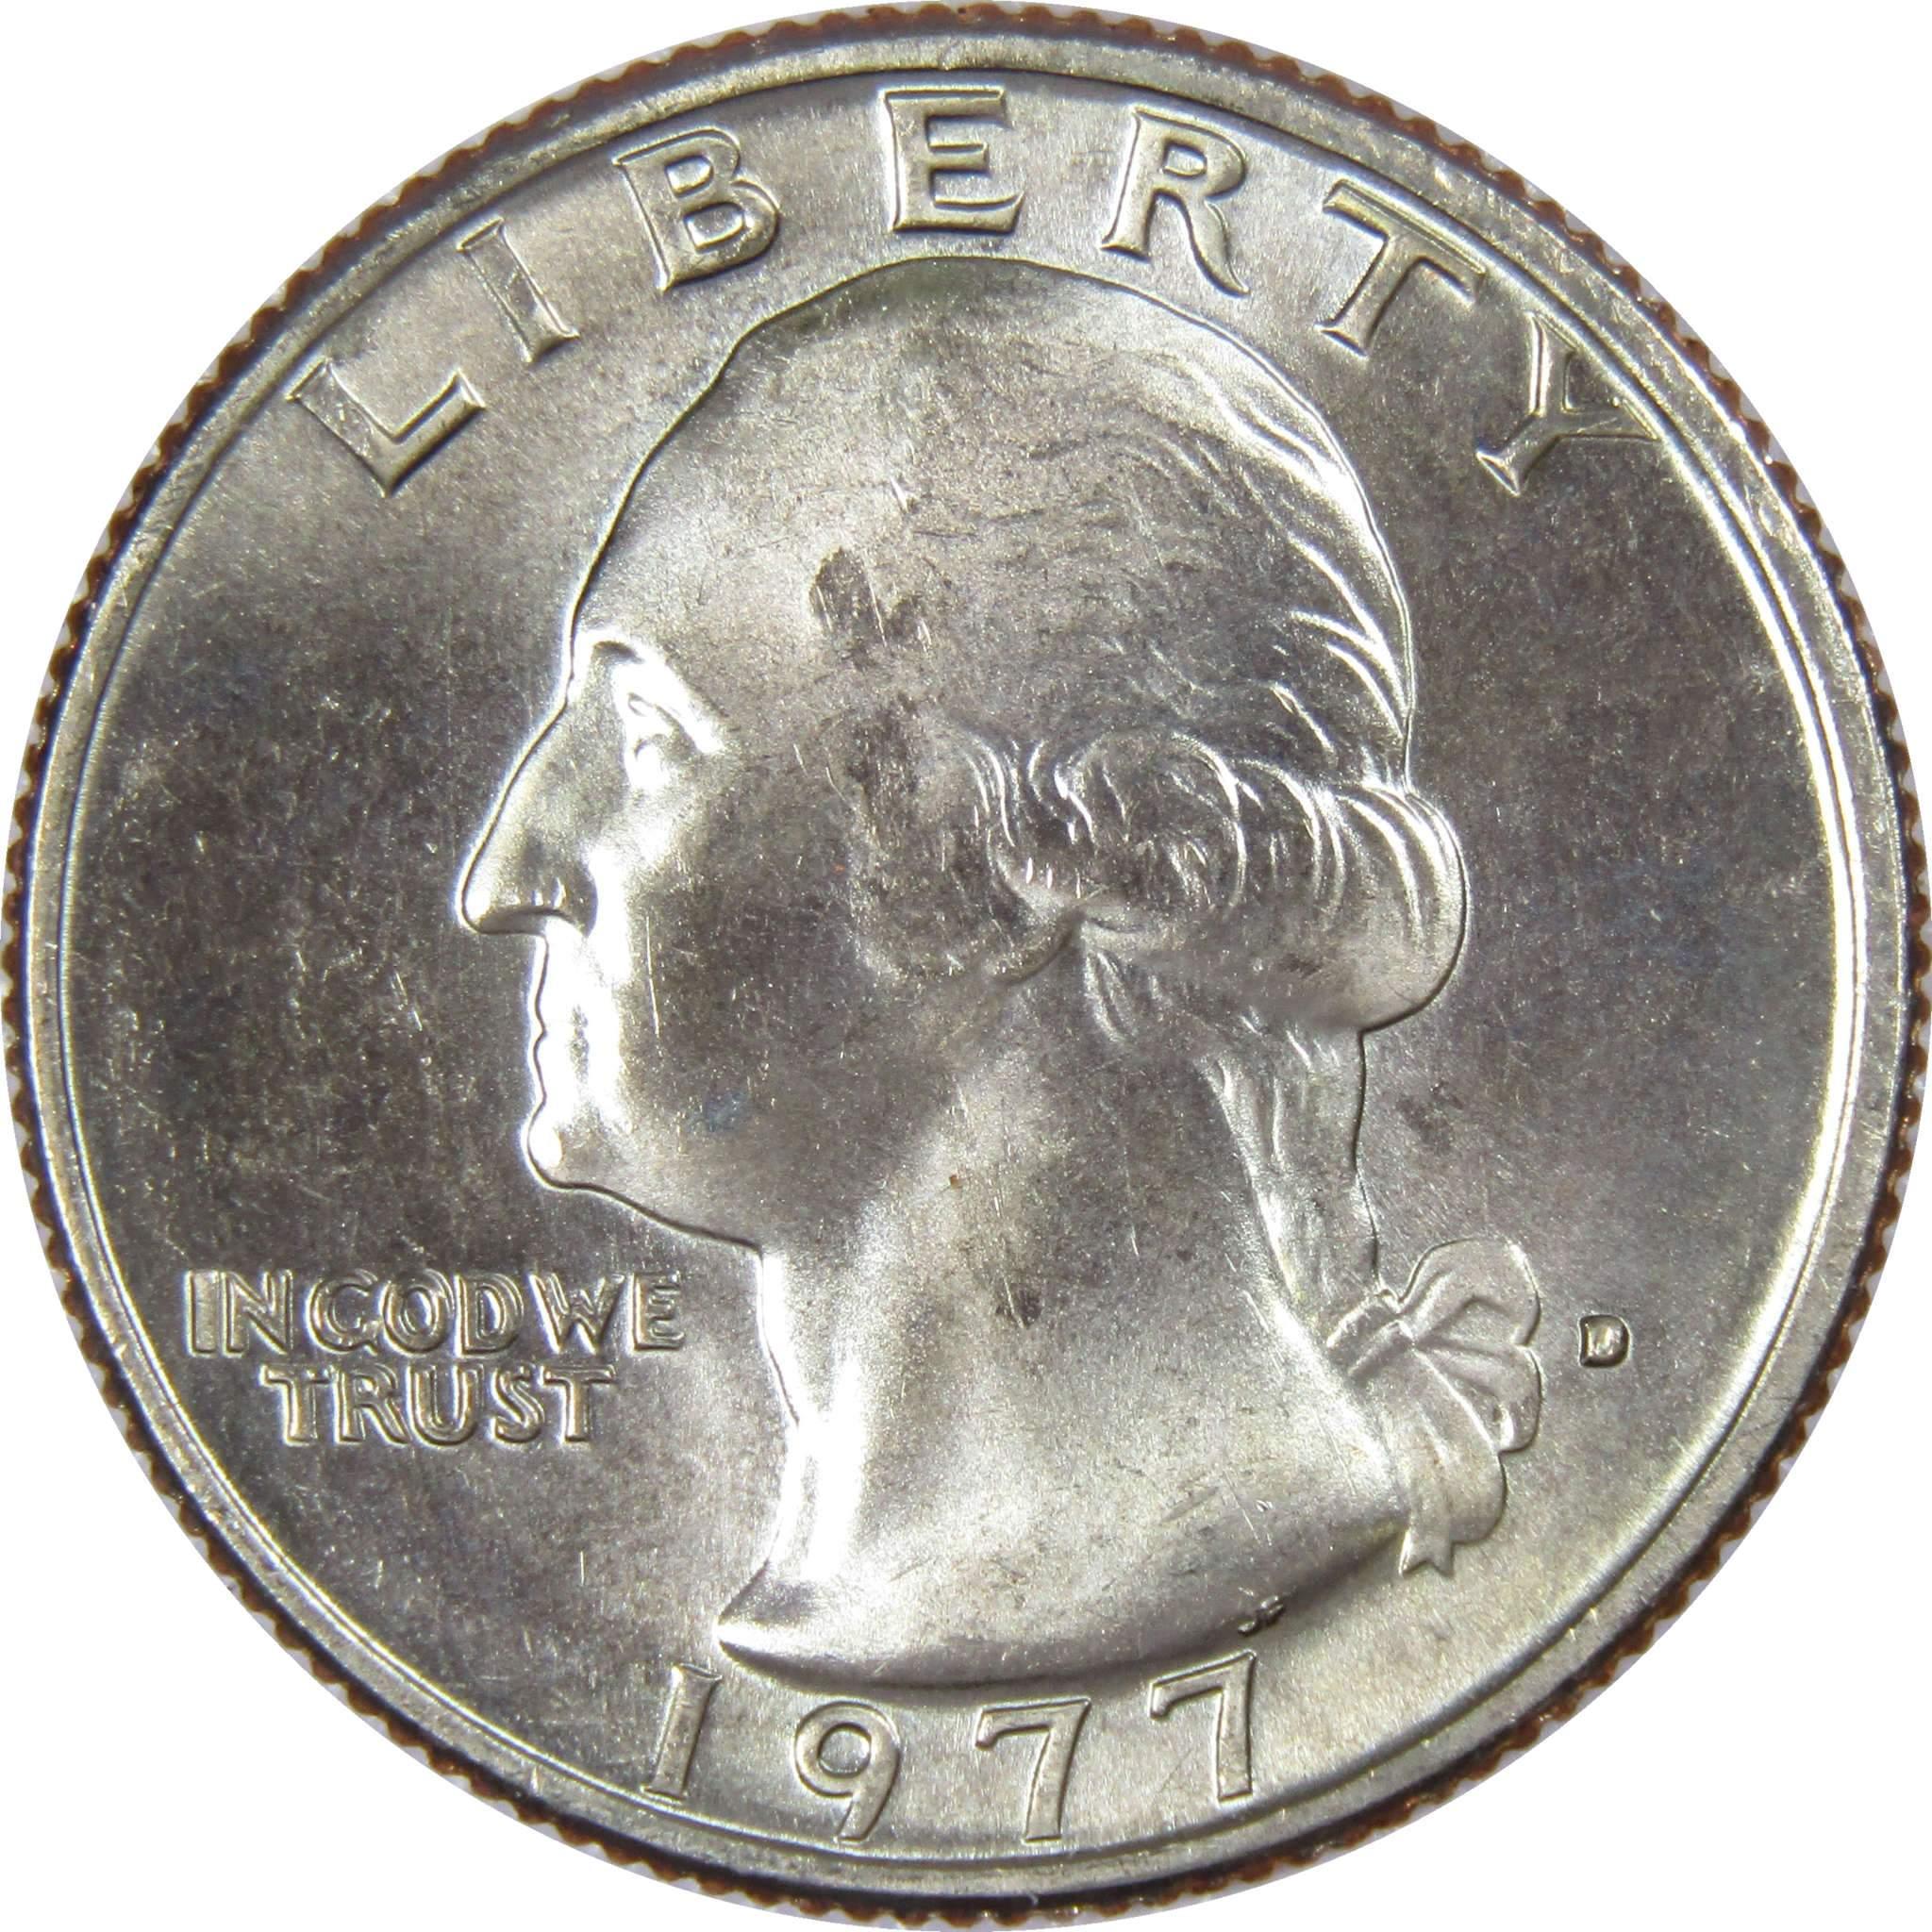 1977 D Washington Quarter BU Uncirculated Mint State 25c US Coin Collectible